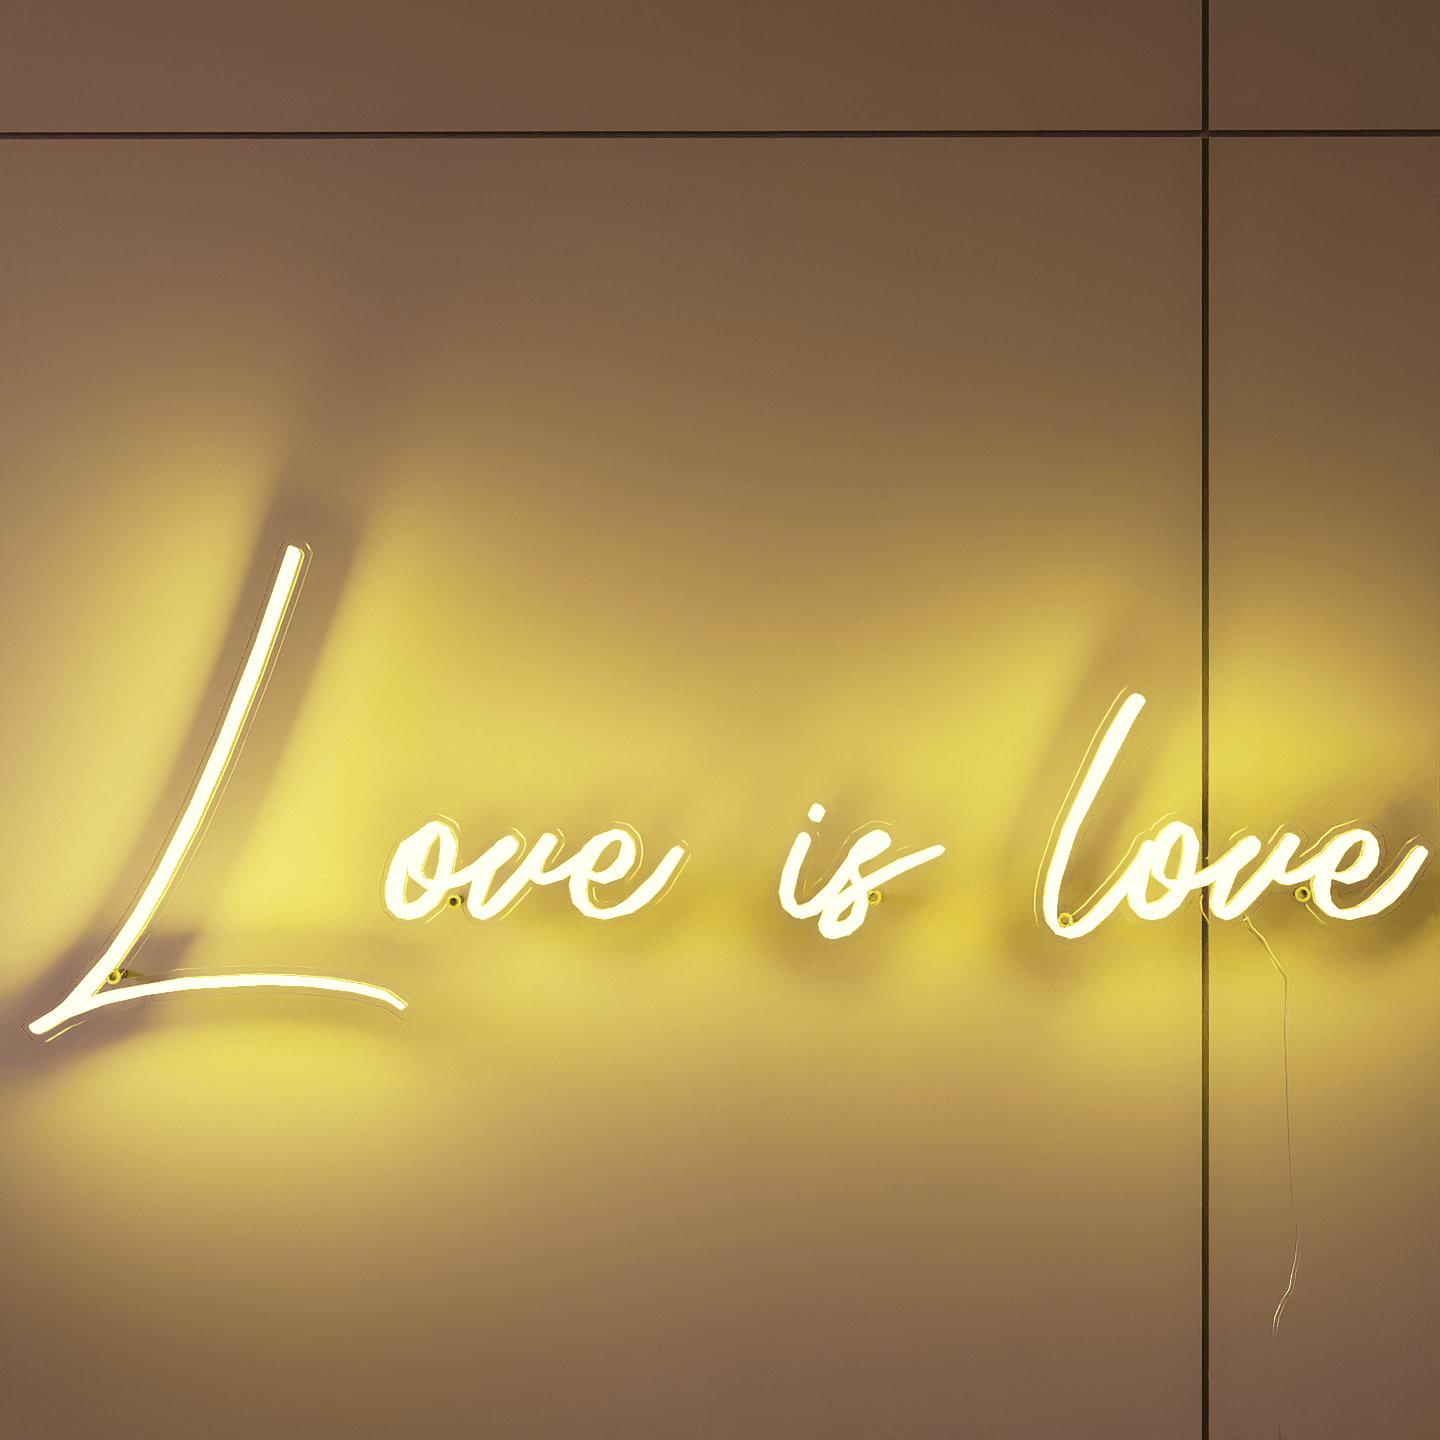 hot-of-lit-yellow-neon-lights-hanging-on-wall-for-display-love-is-love